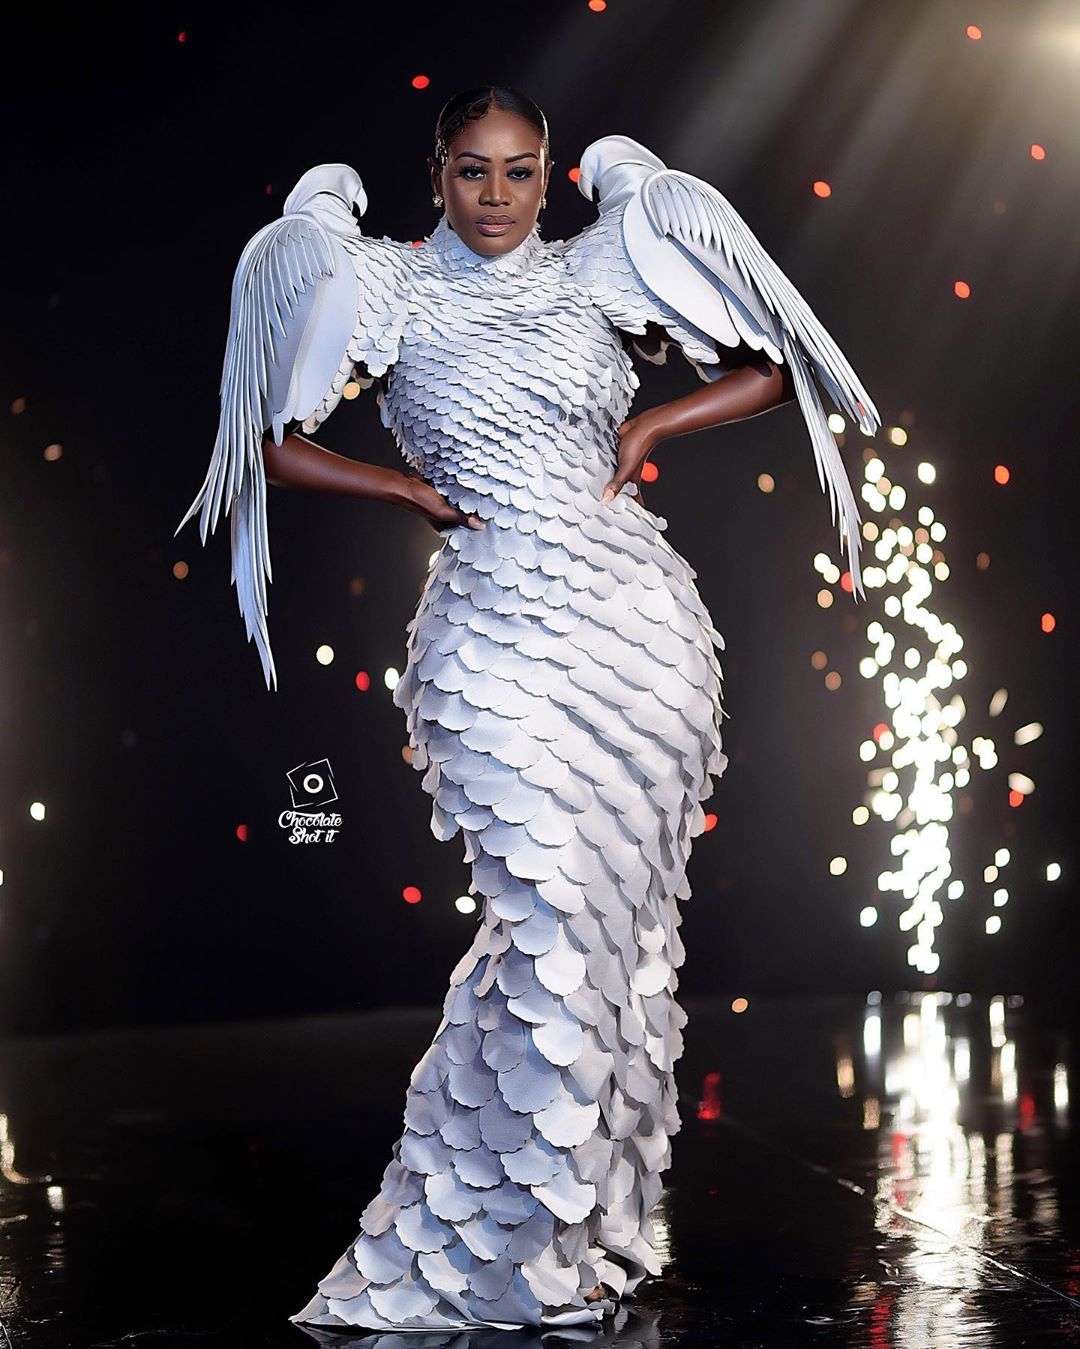 Here Is How Nana Akua Addo Broke The Net & Reminded Ghana She Is Still The Queen Of Red Carpet